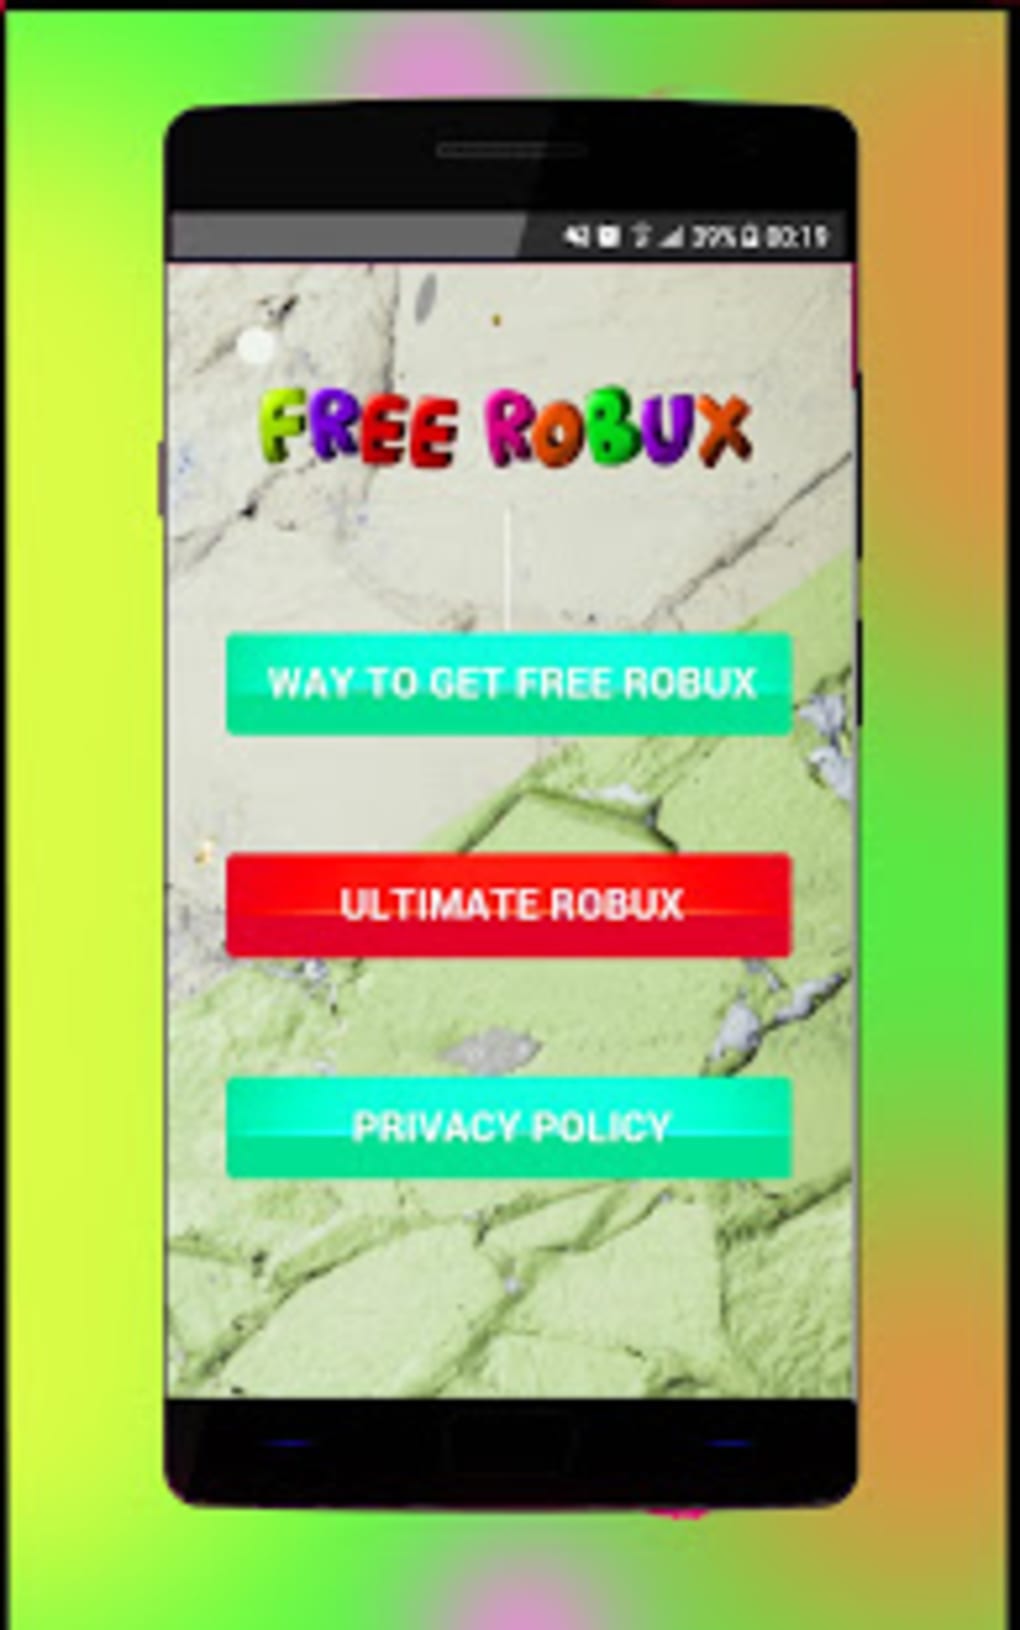 How To Get Free Robux On Roblox Mobile 2019